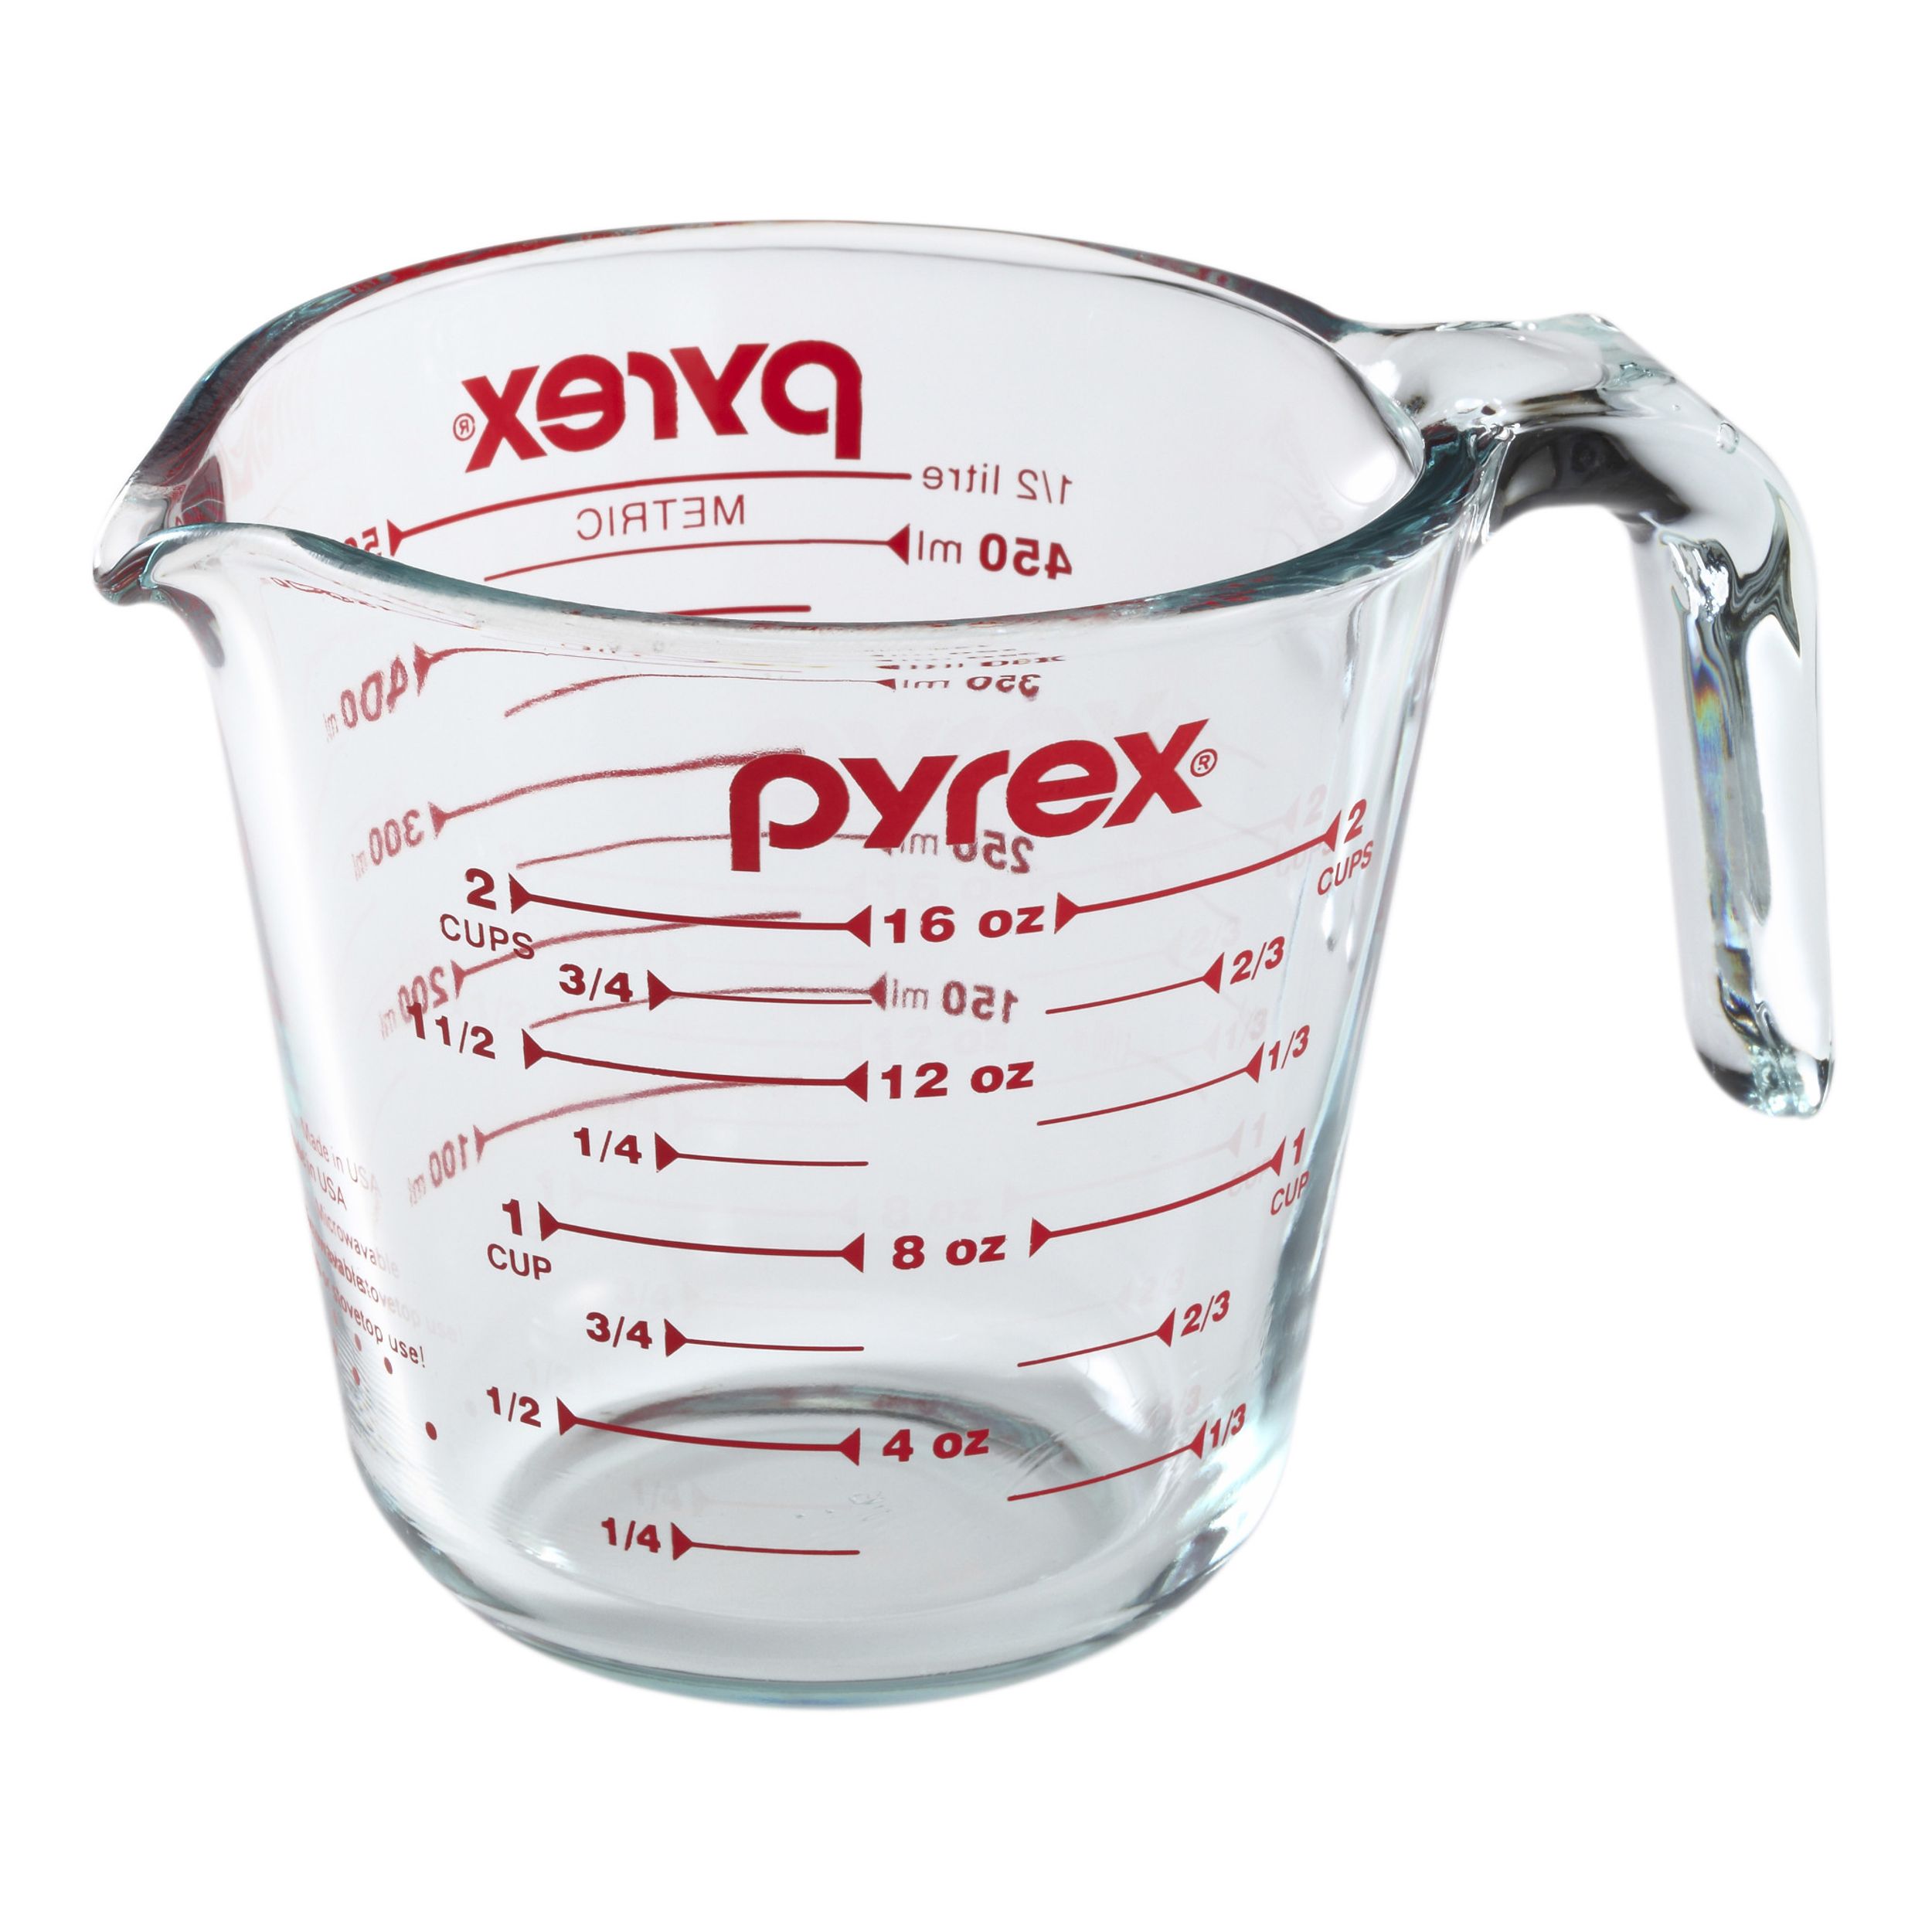 Pyrex 2-cup Measuring Cup - image 1 of 5